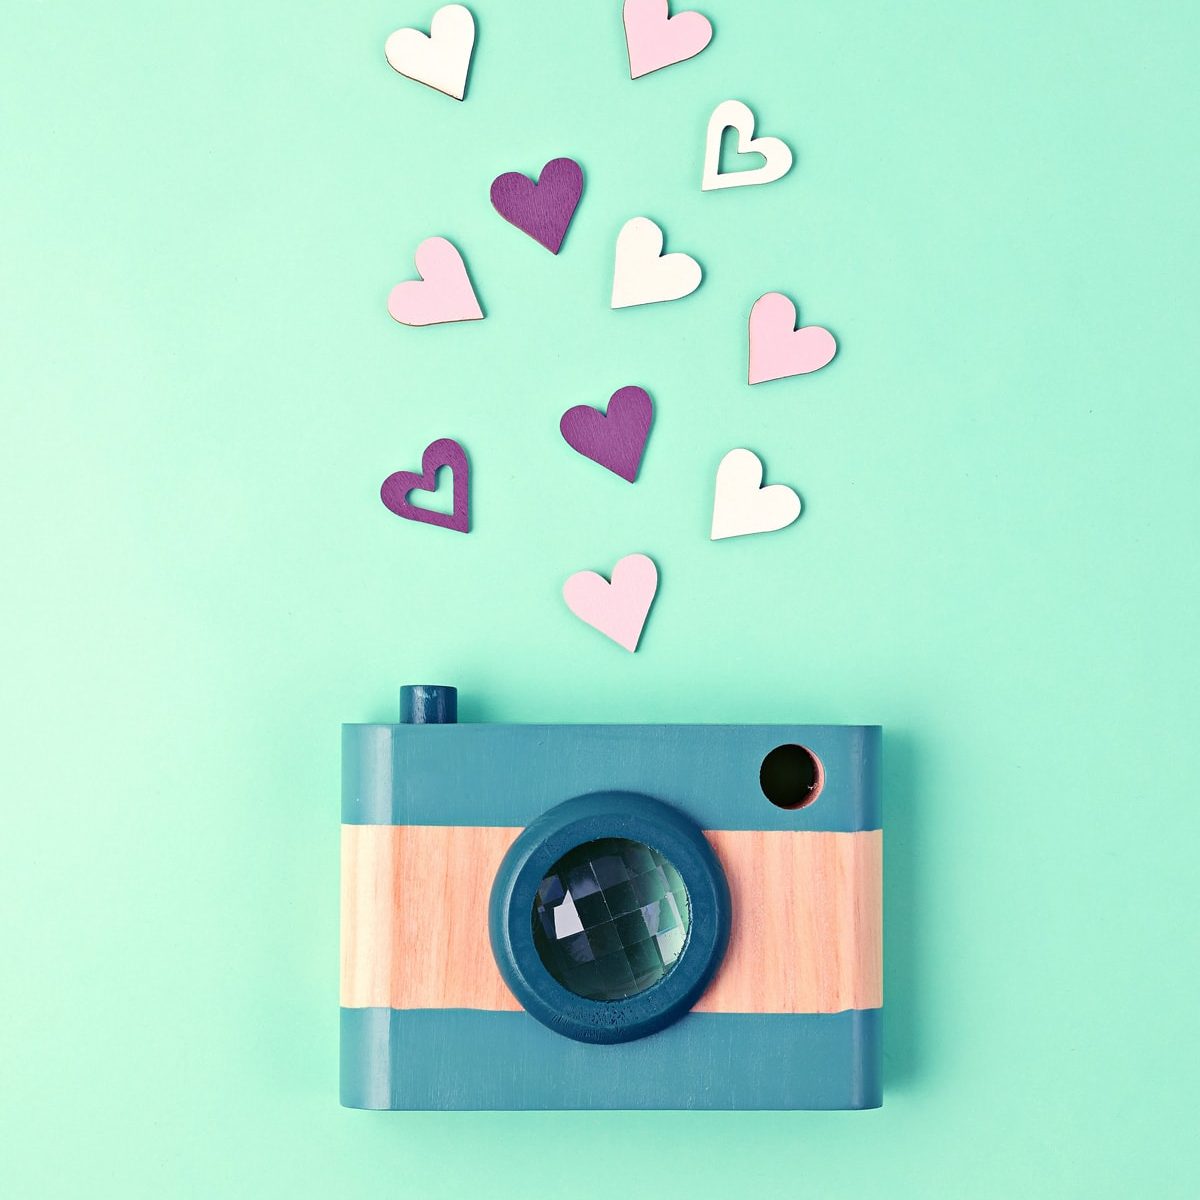 A cute, green and beige, wooden camera is posed with several pink and purple wooden hearts coming out of it. They are arranged on a mint background.